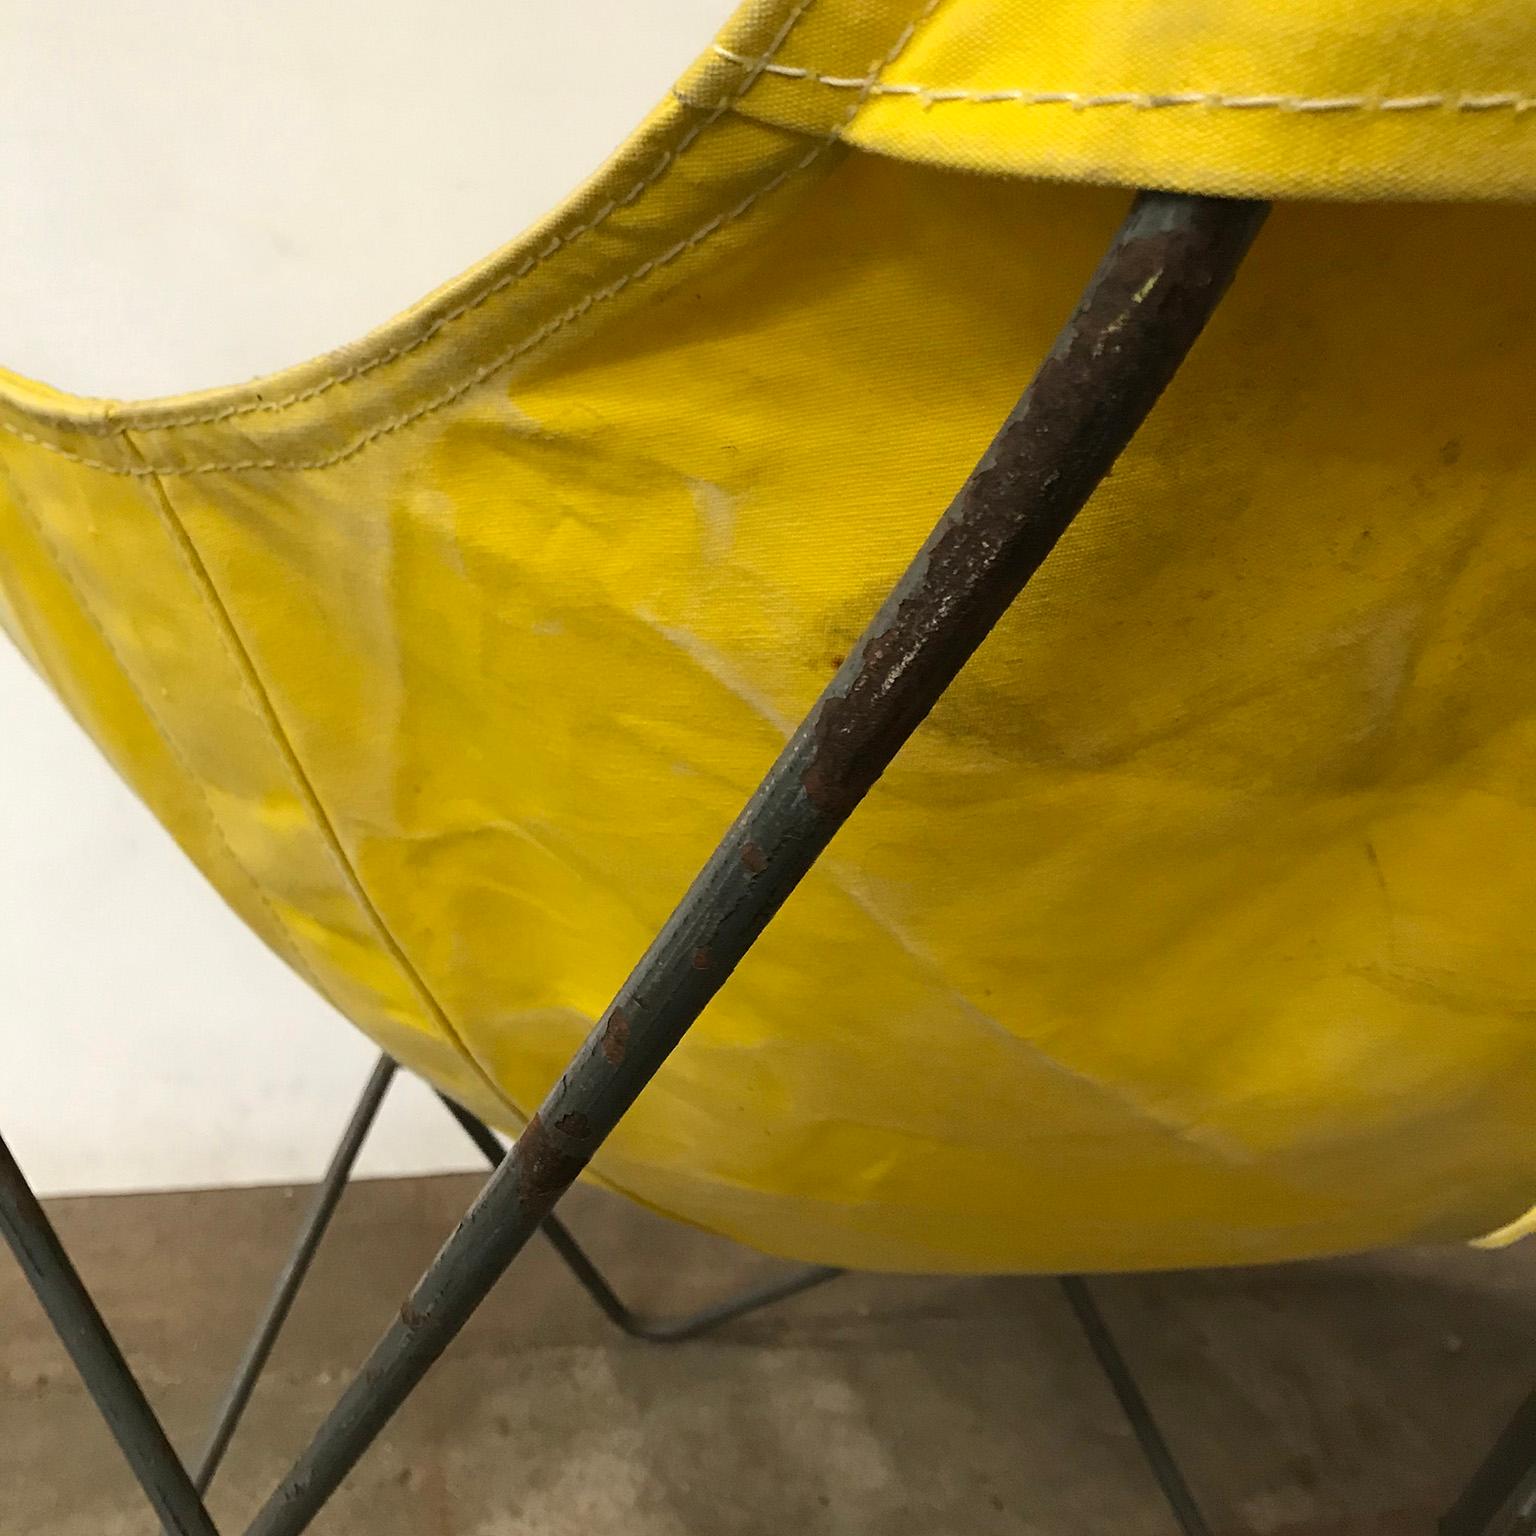 1947, Hardoy, Ferrari, Yellow Cover with Black Base Butterfly Chair 7